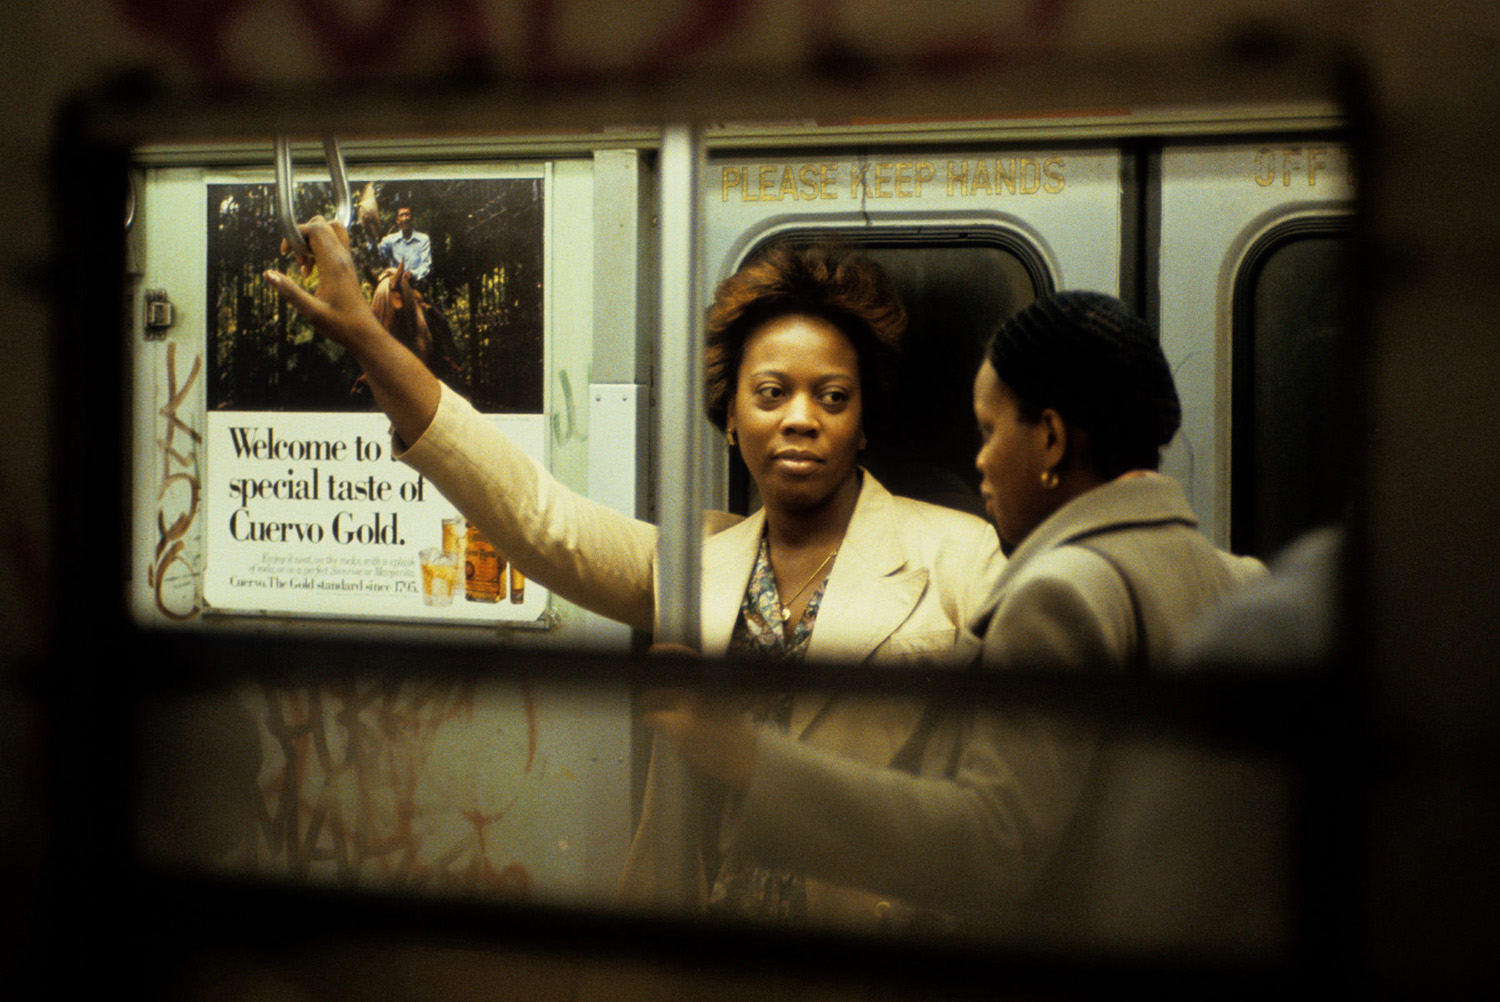 Conversation on the A-train, Subway New York, 1983